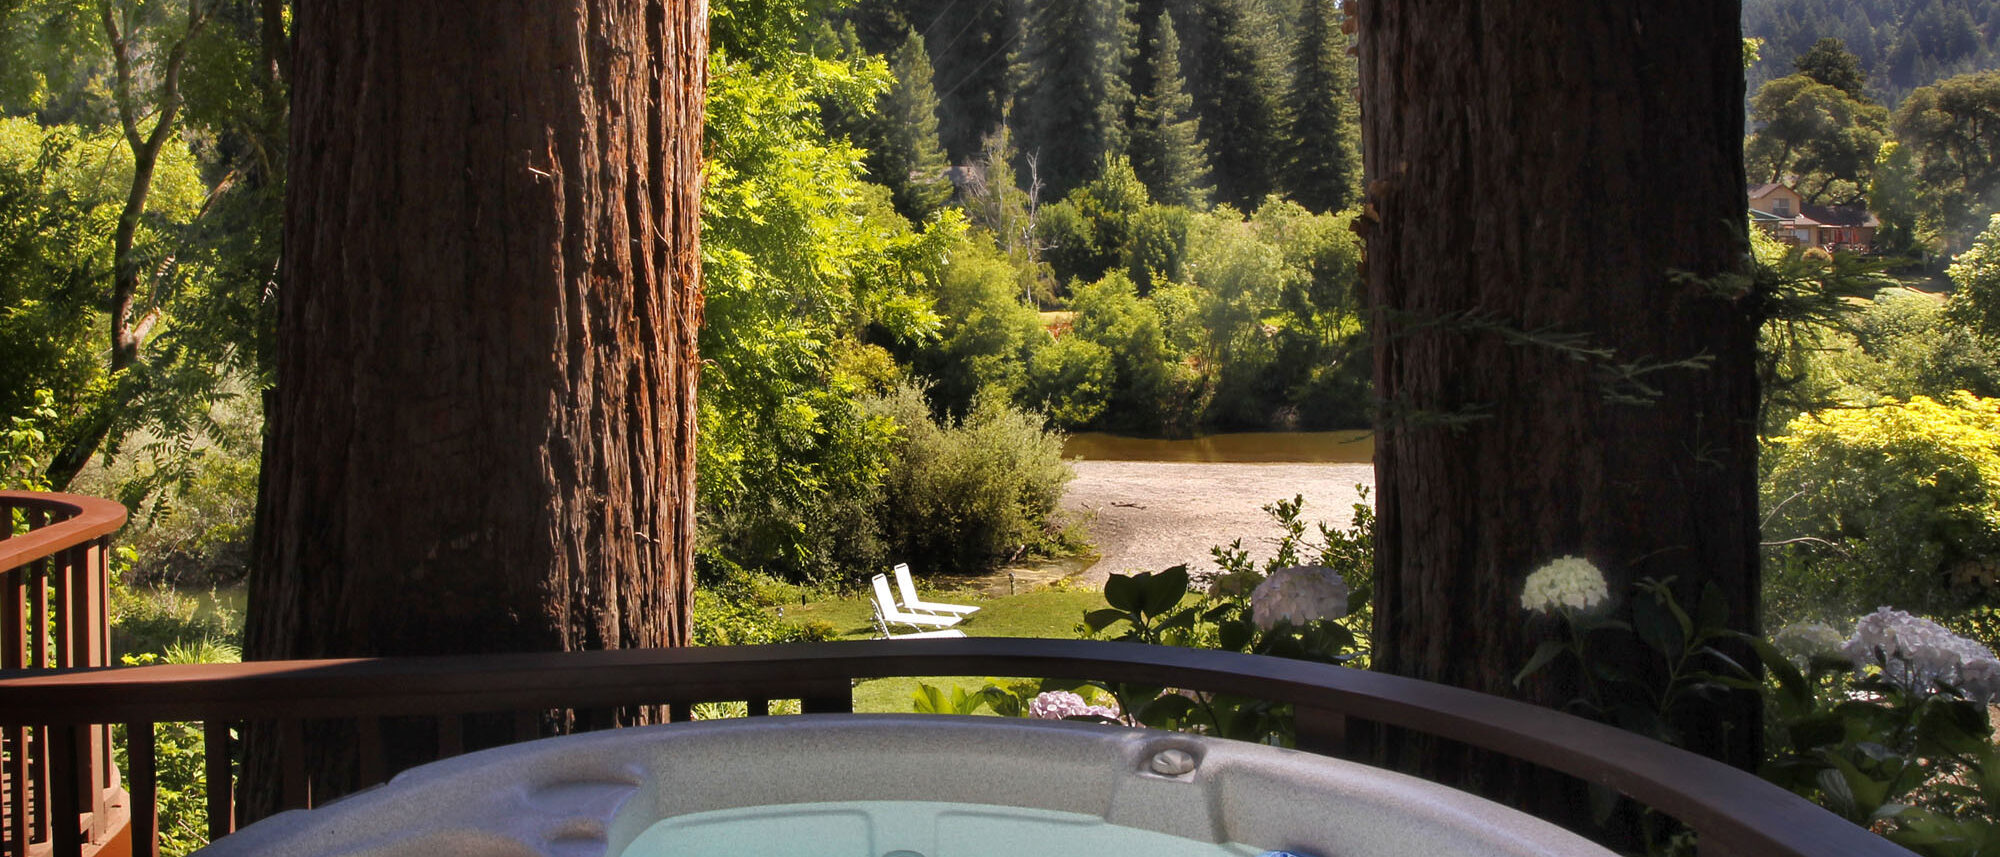 View from Hot Tub to Russian River